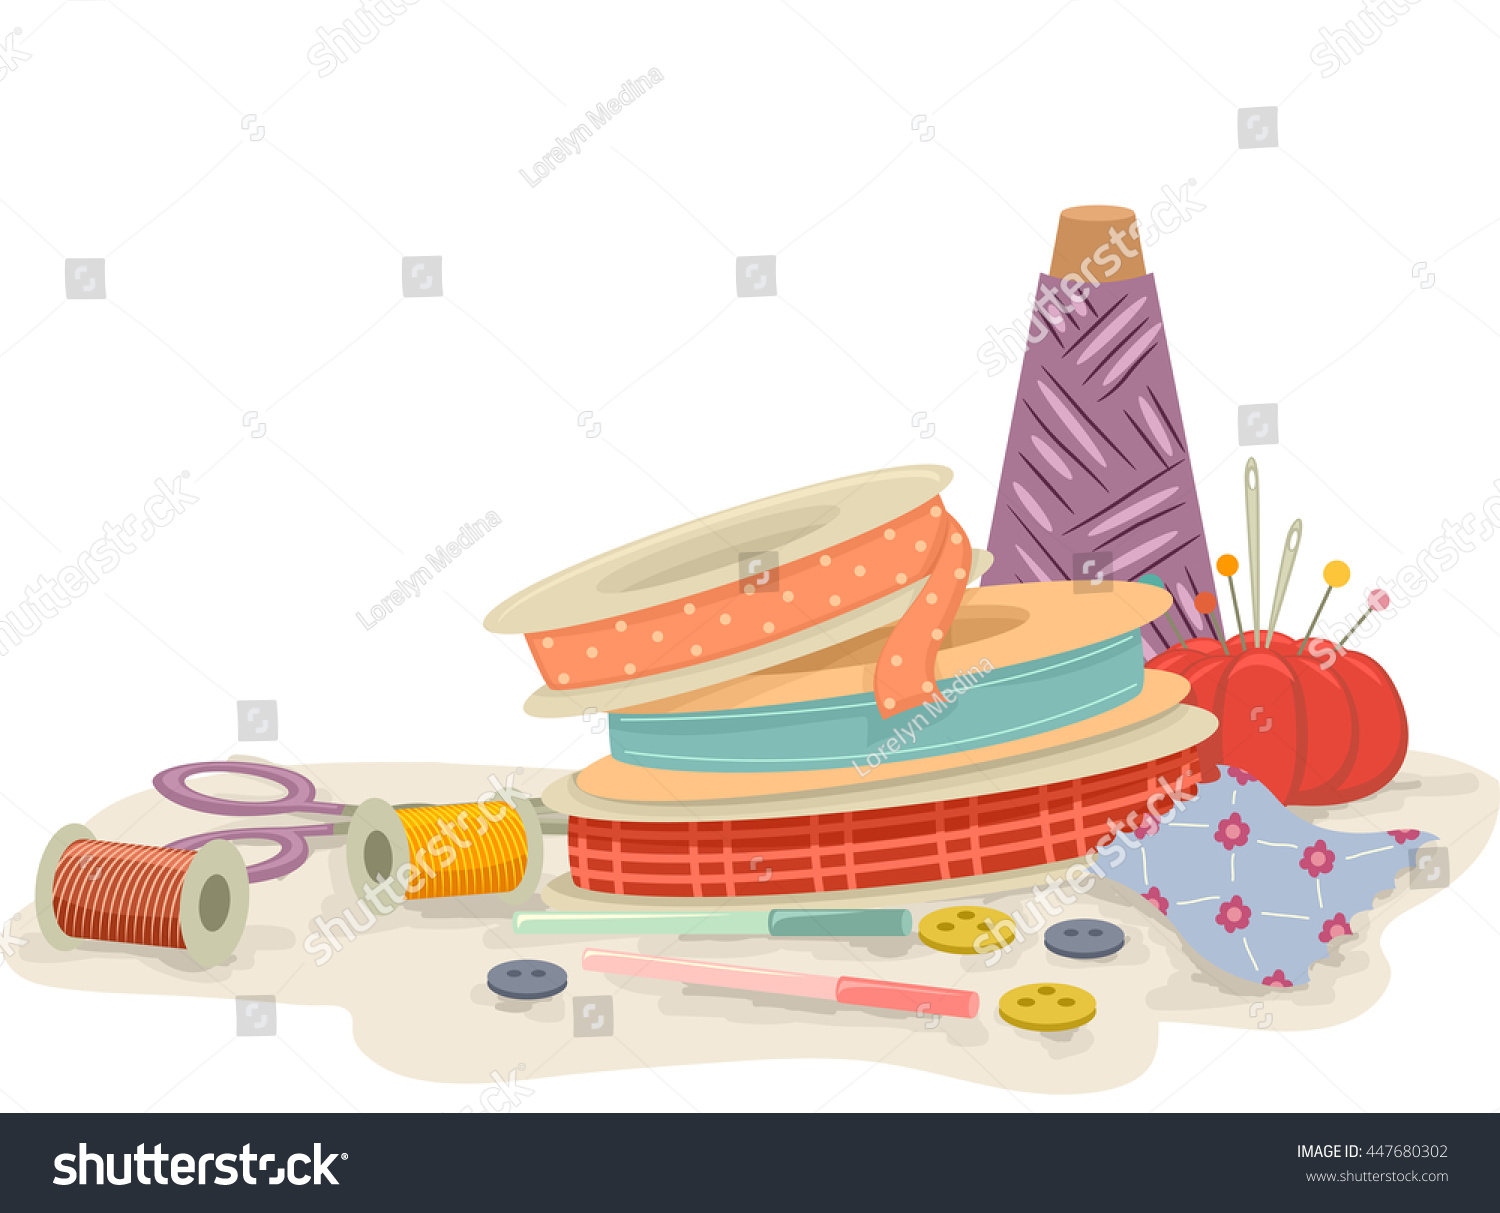 1,052 Ribbon spool isolated Stock Illustrations, Images & Vectors ...